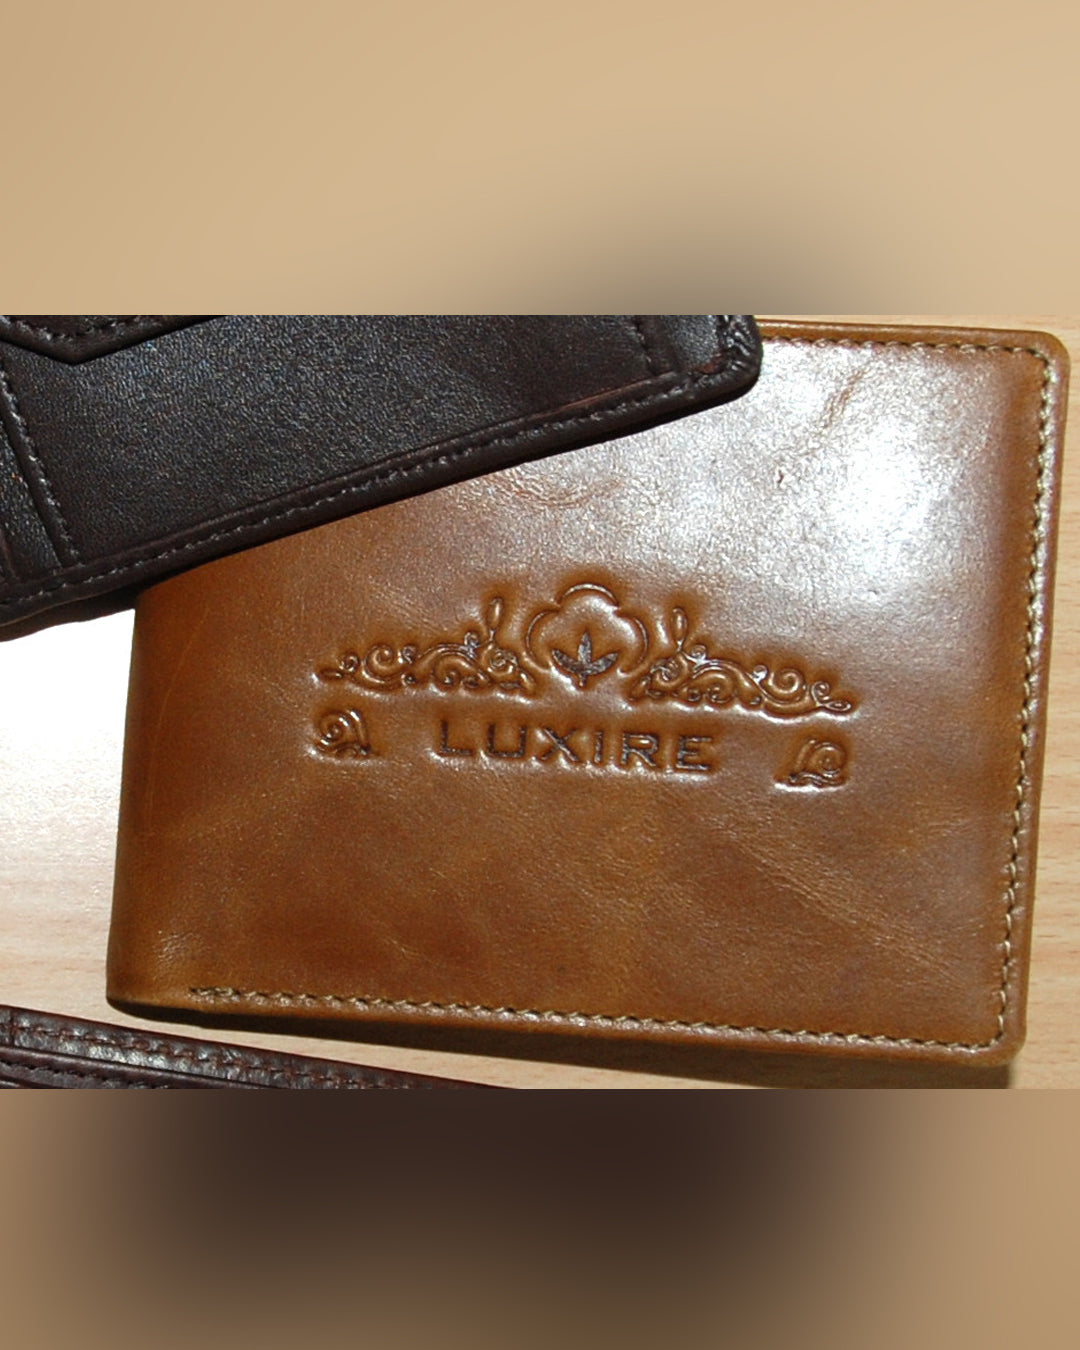 Luxire Leather Wallet 2013 Collection